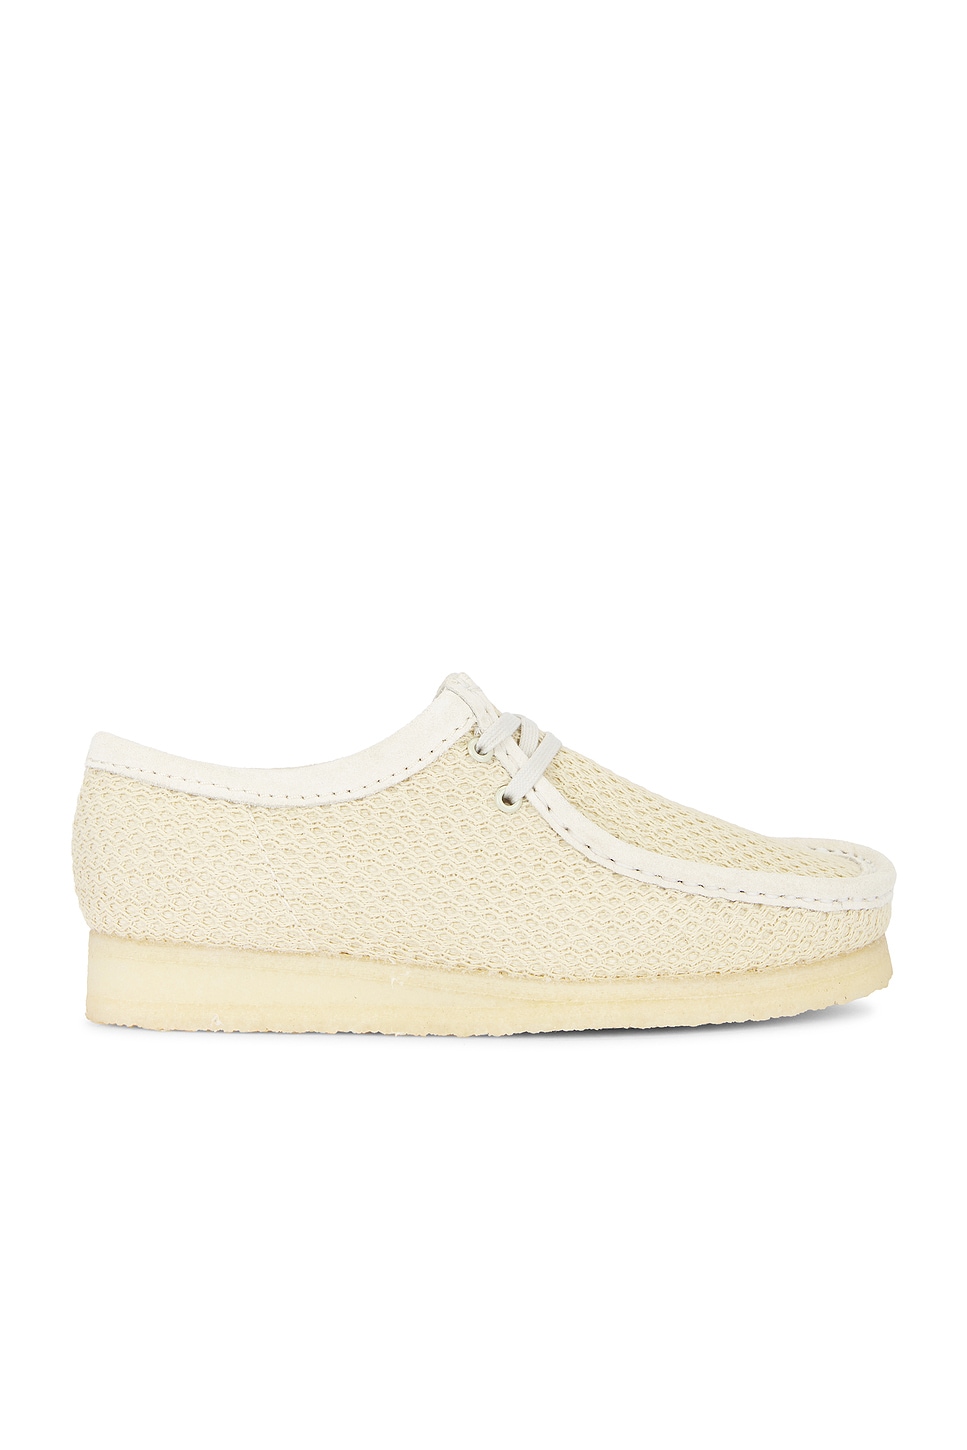 Image 1 of Clarks Wallabee Boot in Off White Mesh